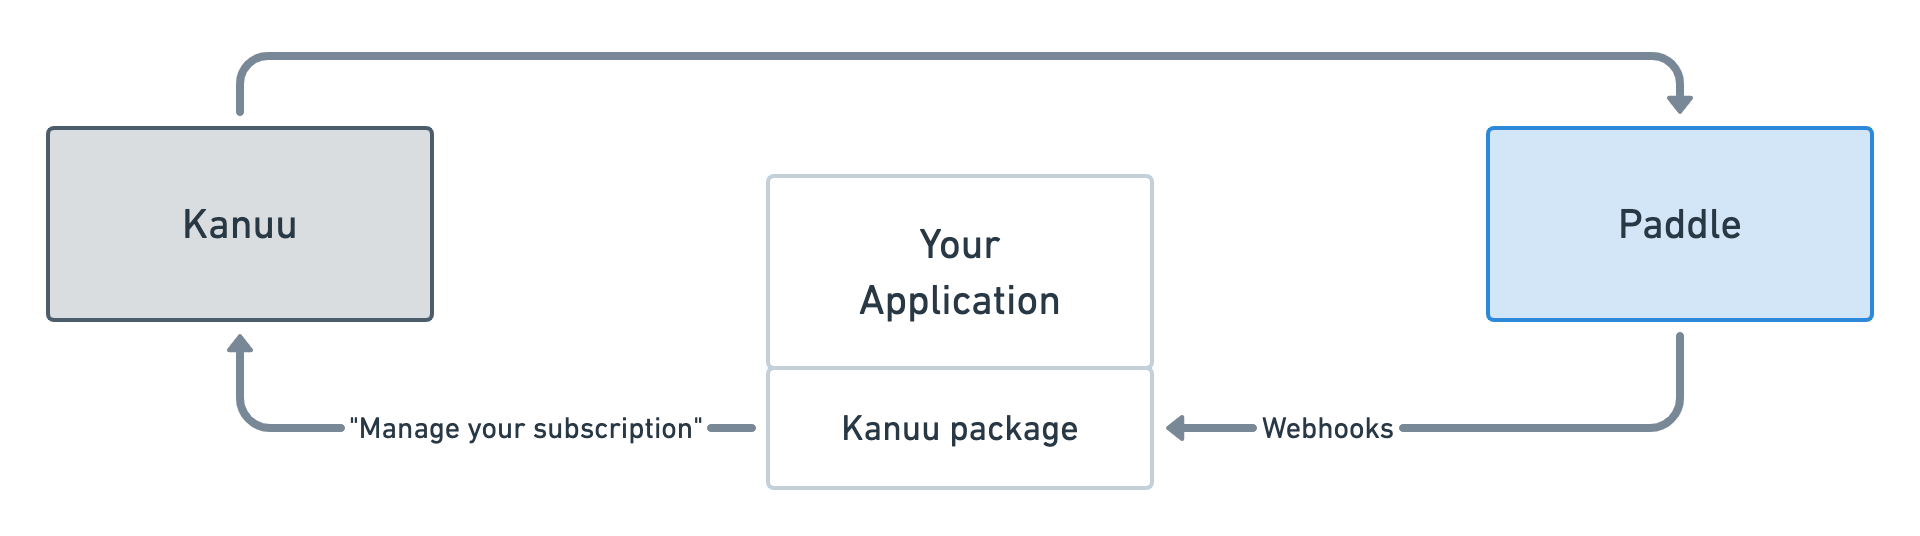 Diagram showing your application between Kanuu and Paddle.